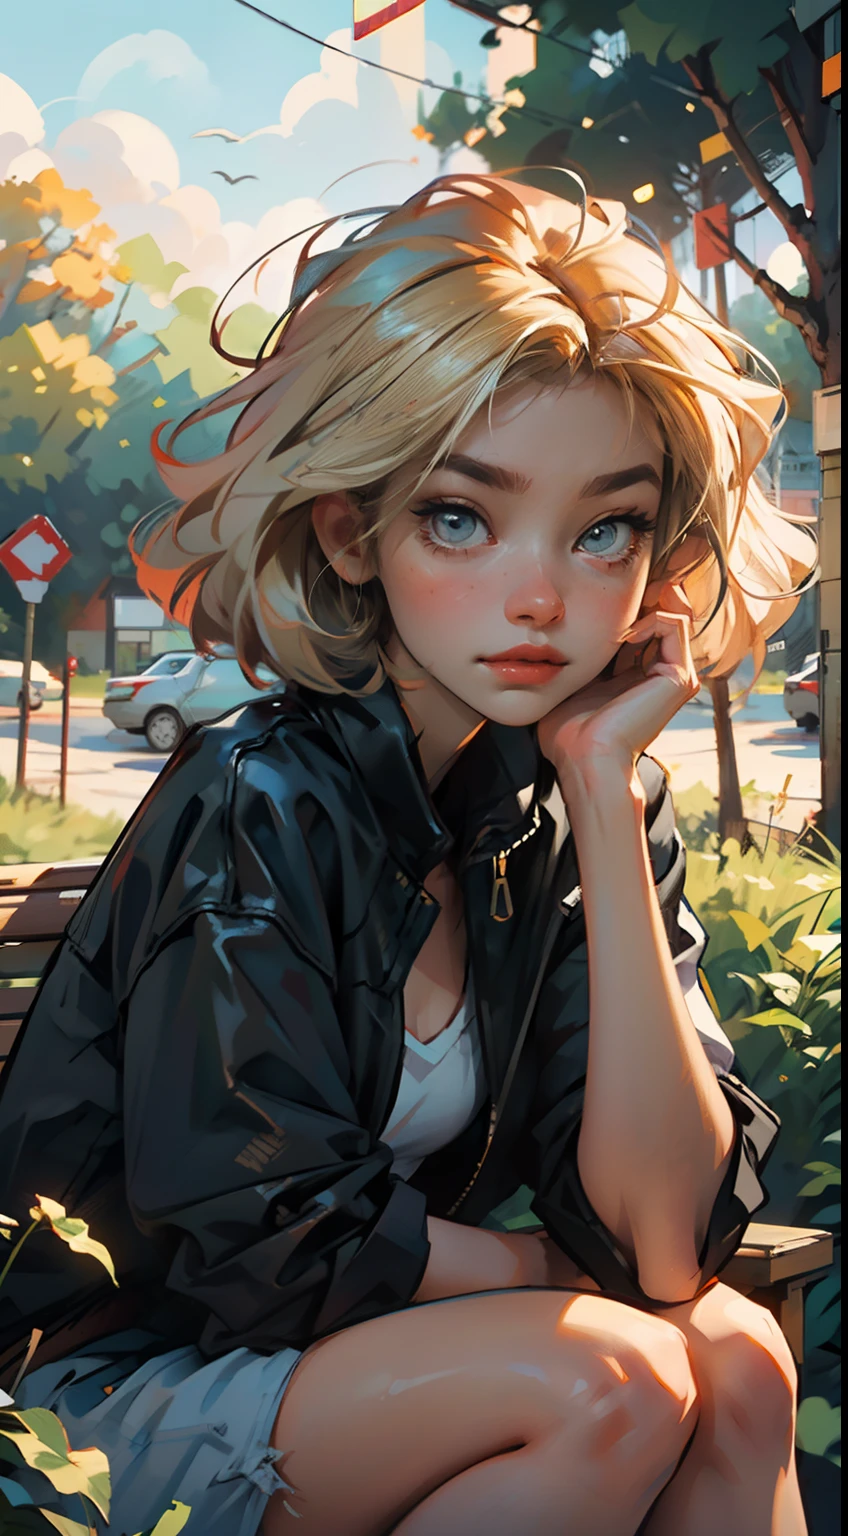 4K, high resolution, Best quality, Masterpiece, perfect, really warm colors, perfectly shaded, Perfect lighting, posted on e621, (by Jim Lee), masterpiece, digital paint, (close up, Cute girl, 20 years old, blond short hair, simplified eyes ), sucking a lollipop, sitting in the grass in a hide park in London. 1990s \(style\),